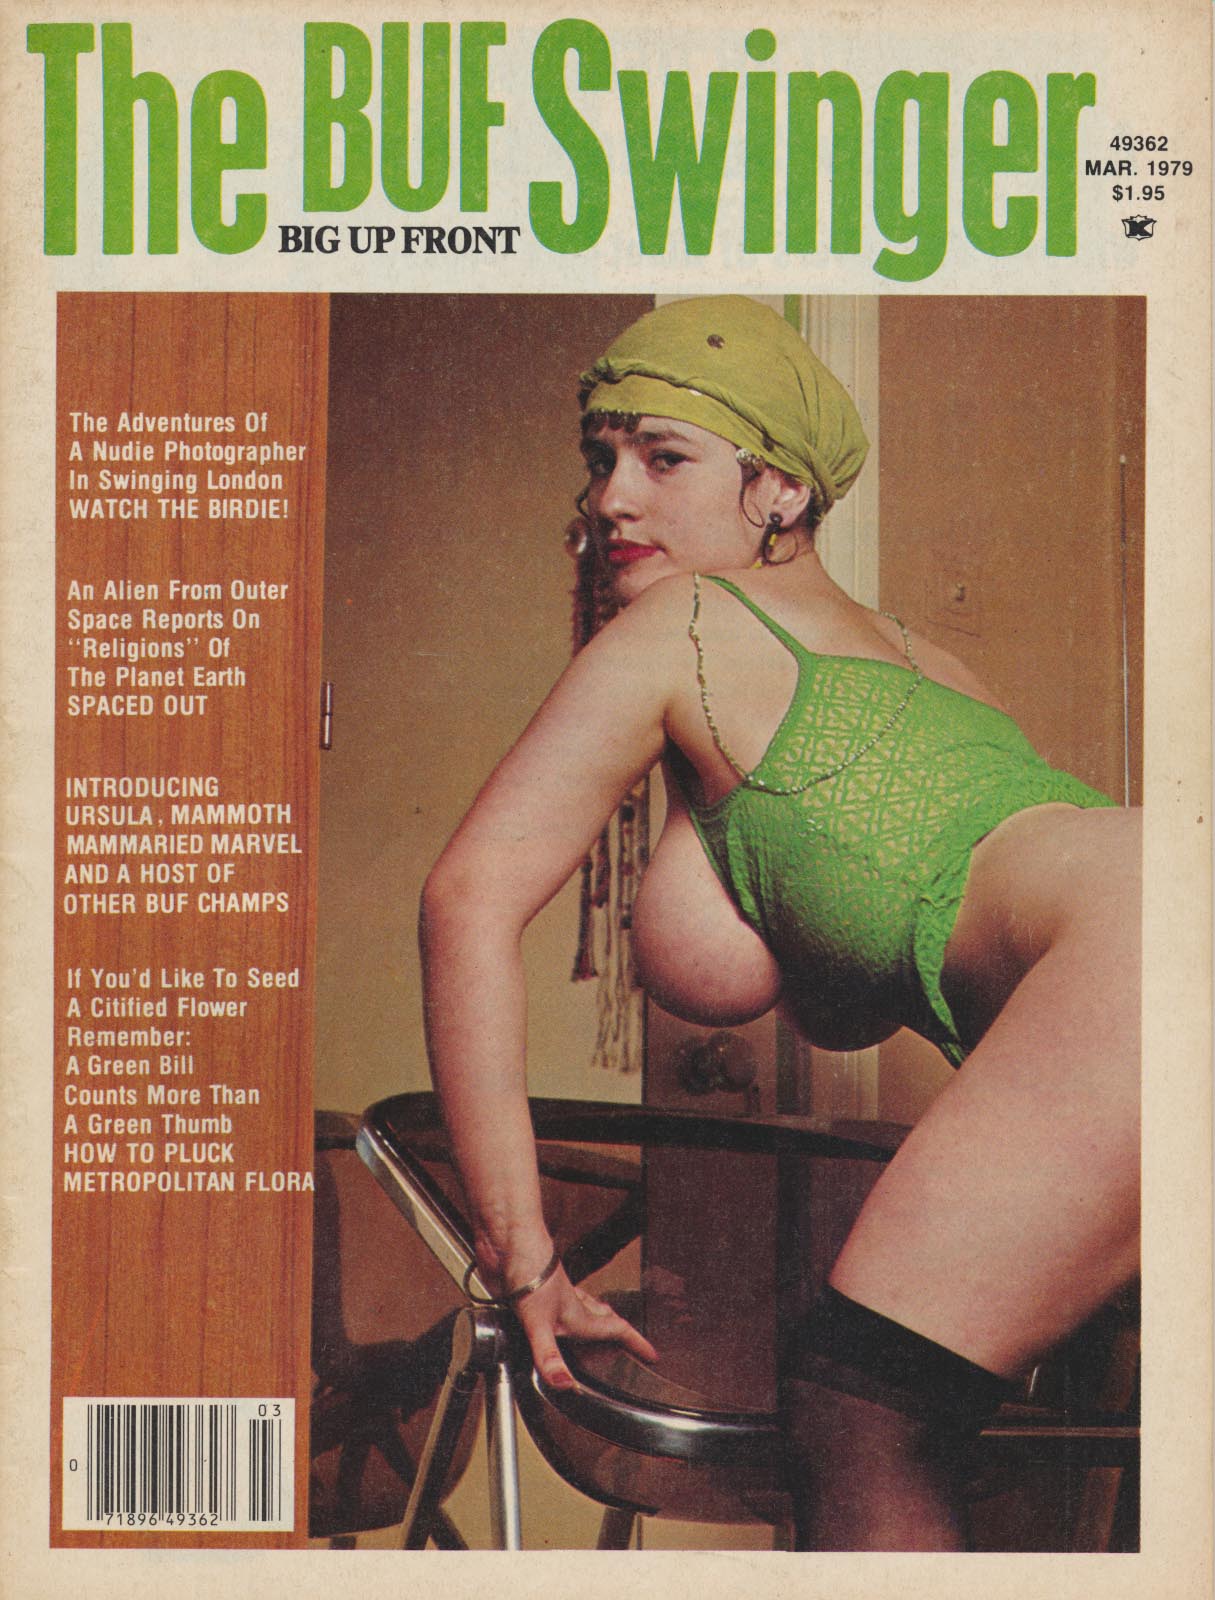 BUF (Big Up Front) Swinger March 1979 magazine back issue BUF (Big Up Front) Swinger magizine back copy 